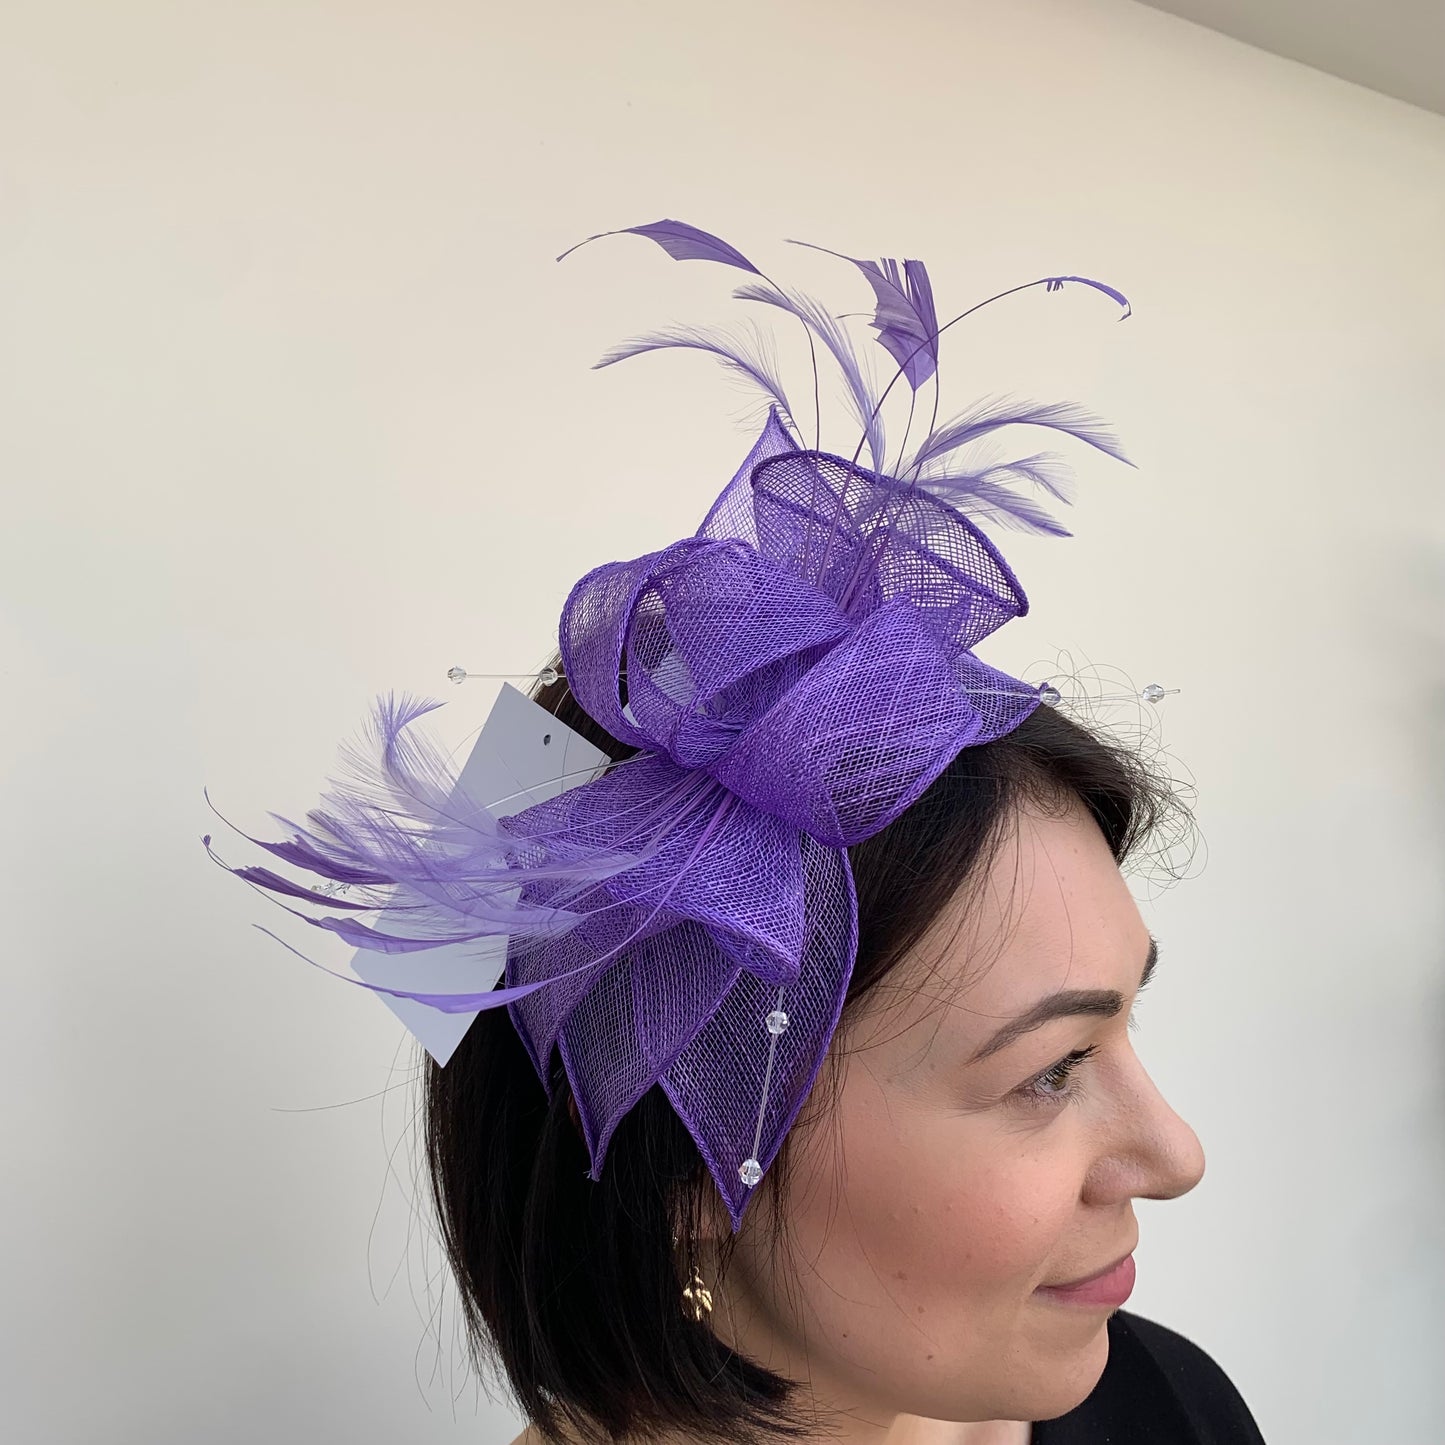 J Bees JB23/318 Fascinator in Purples and Lilacs